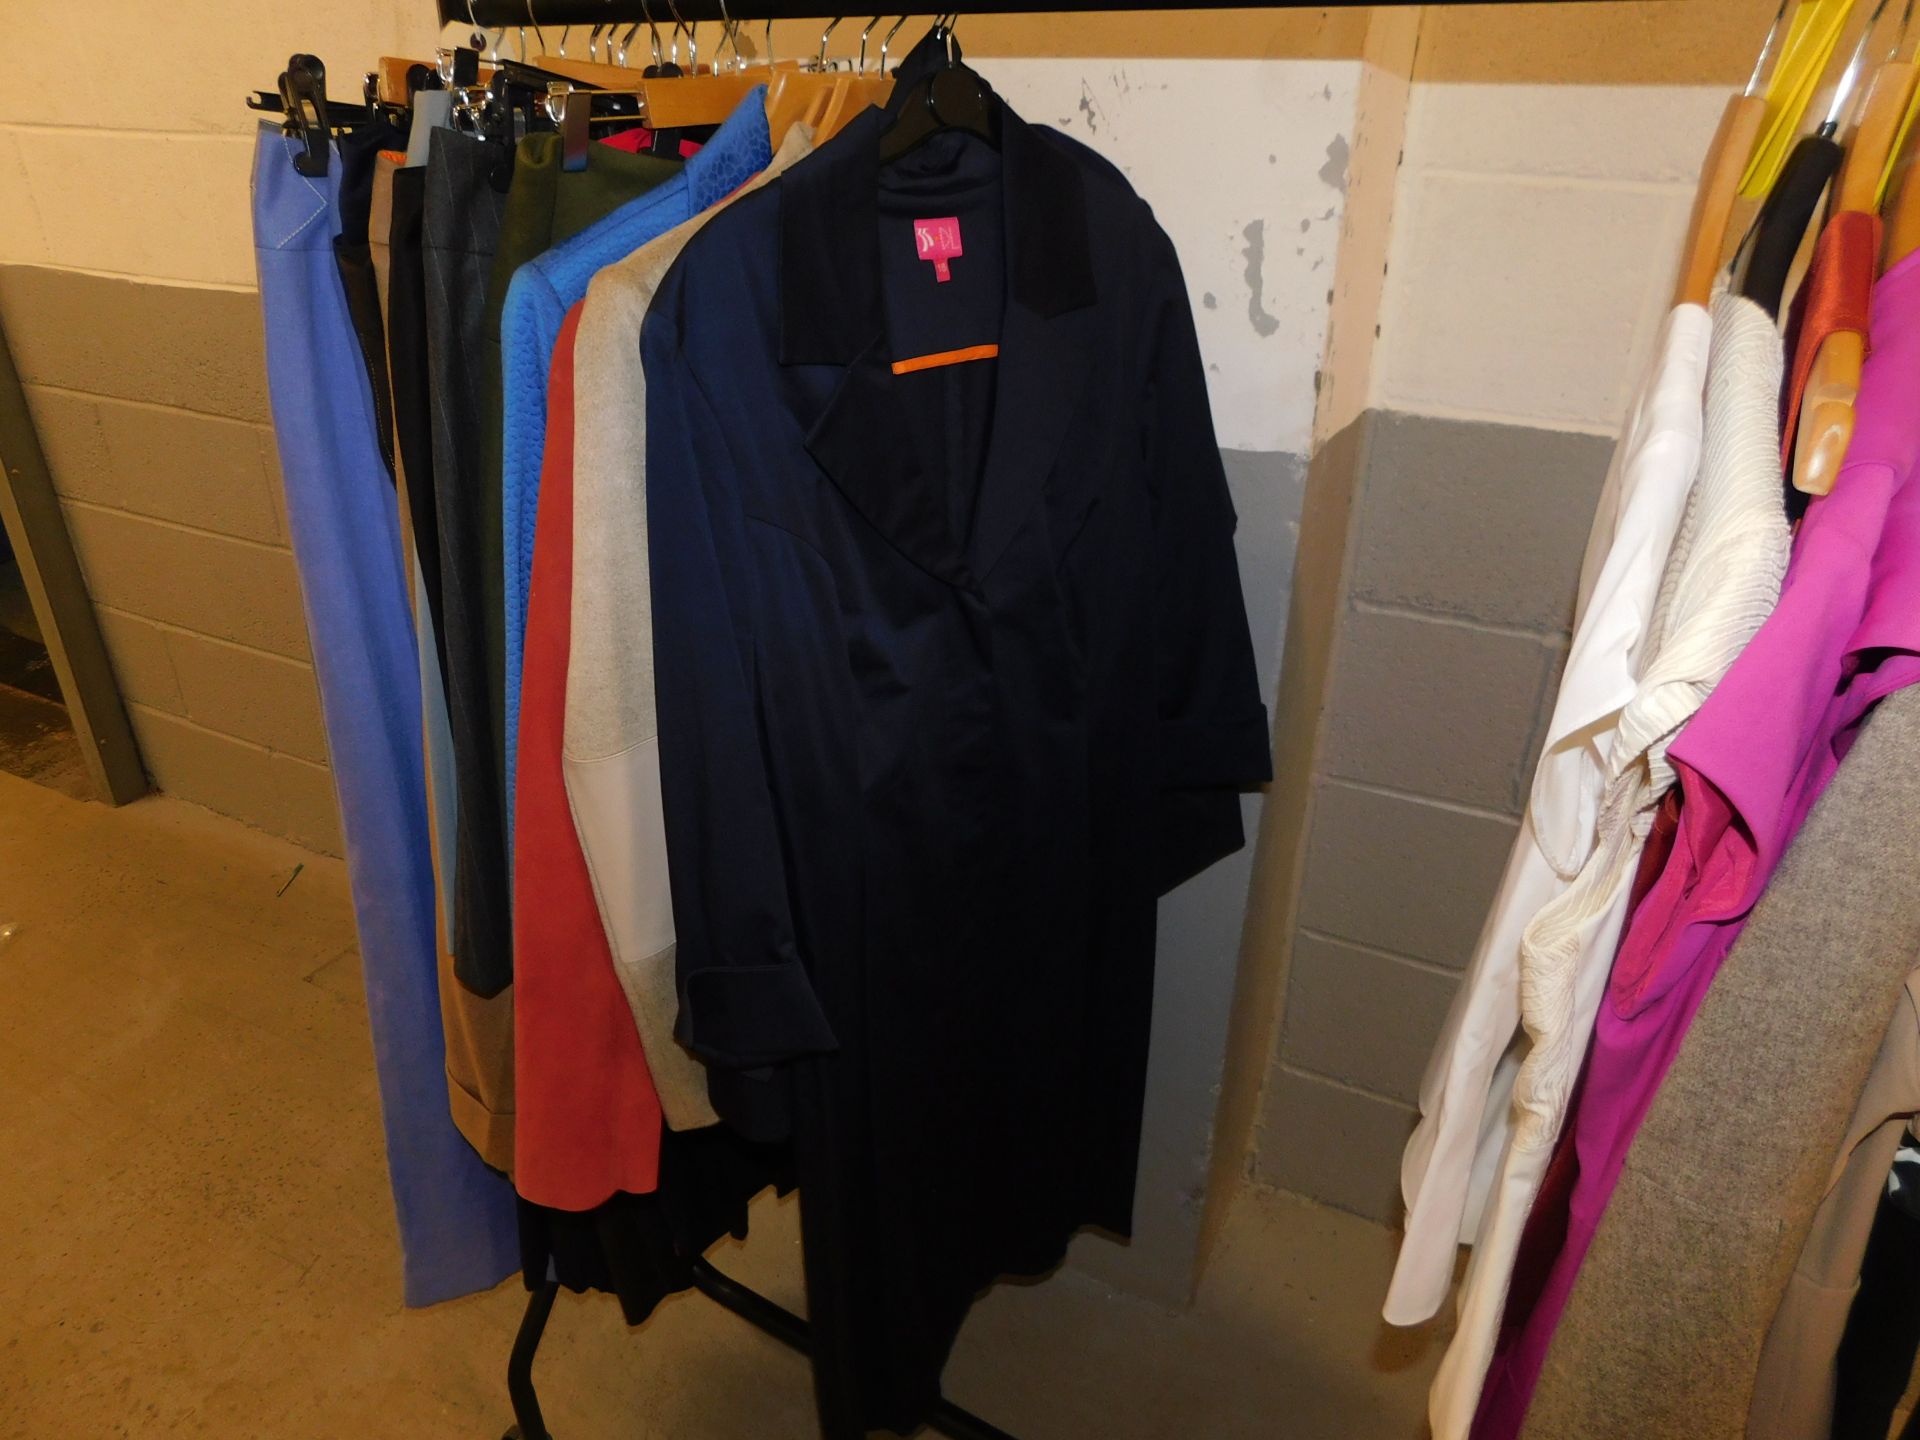 Contents of Rail of "Number 35" Ladies Business Wear, Size 16 (7 Skirts, 8  Tops/Dresses, 6 Jackets, - Image 6 of 9